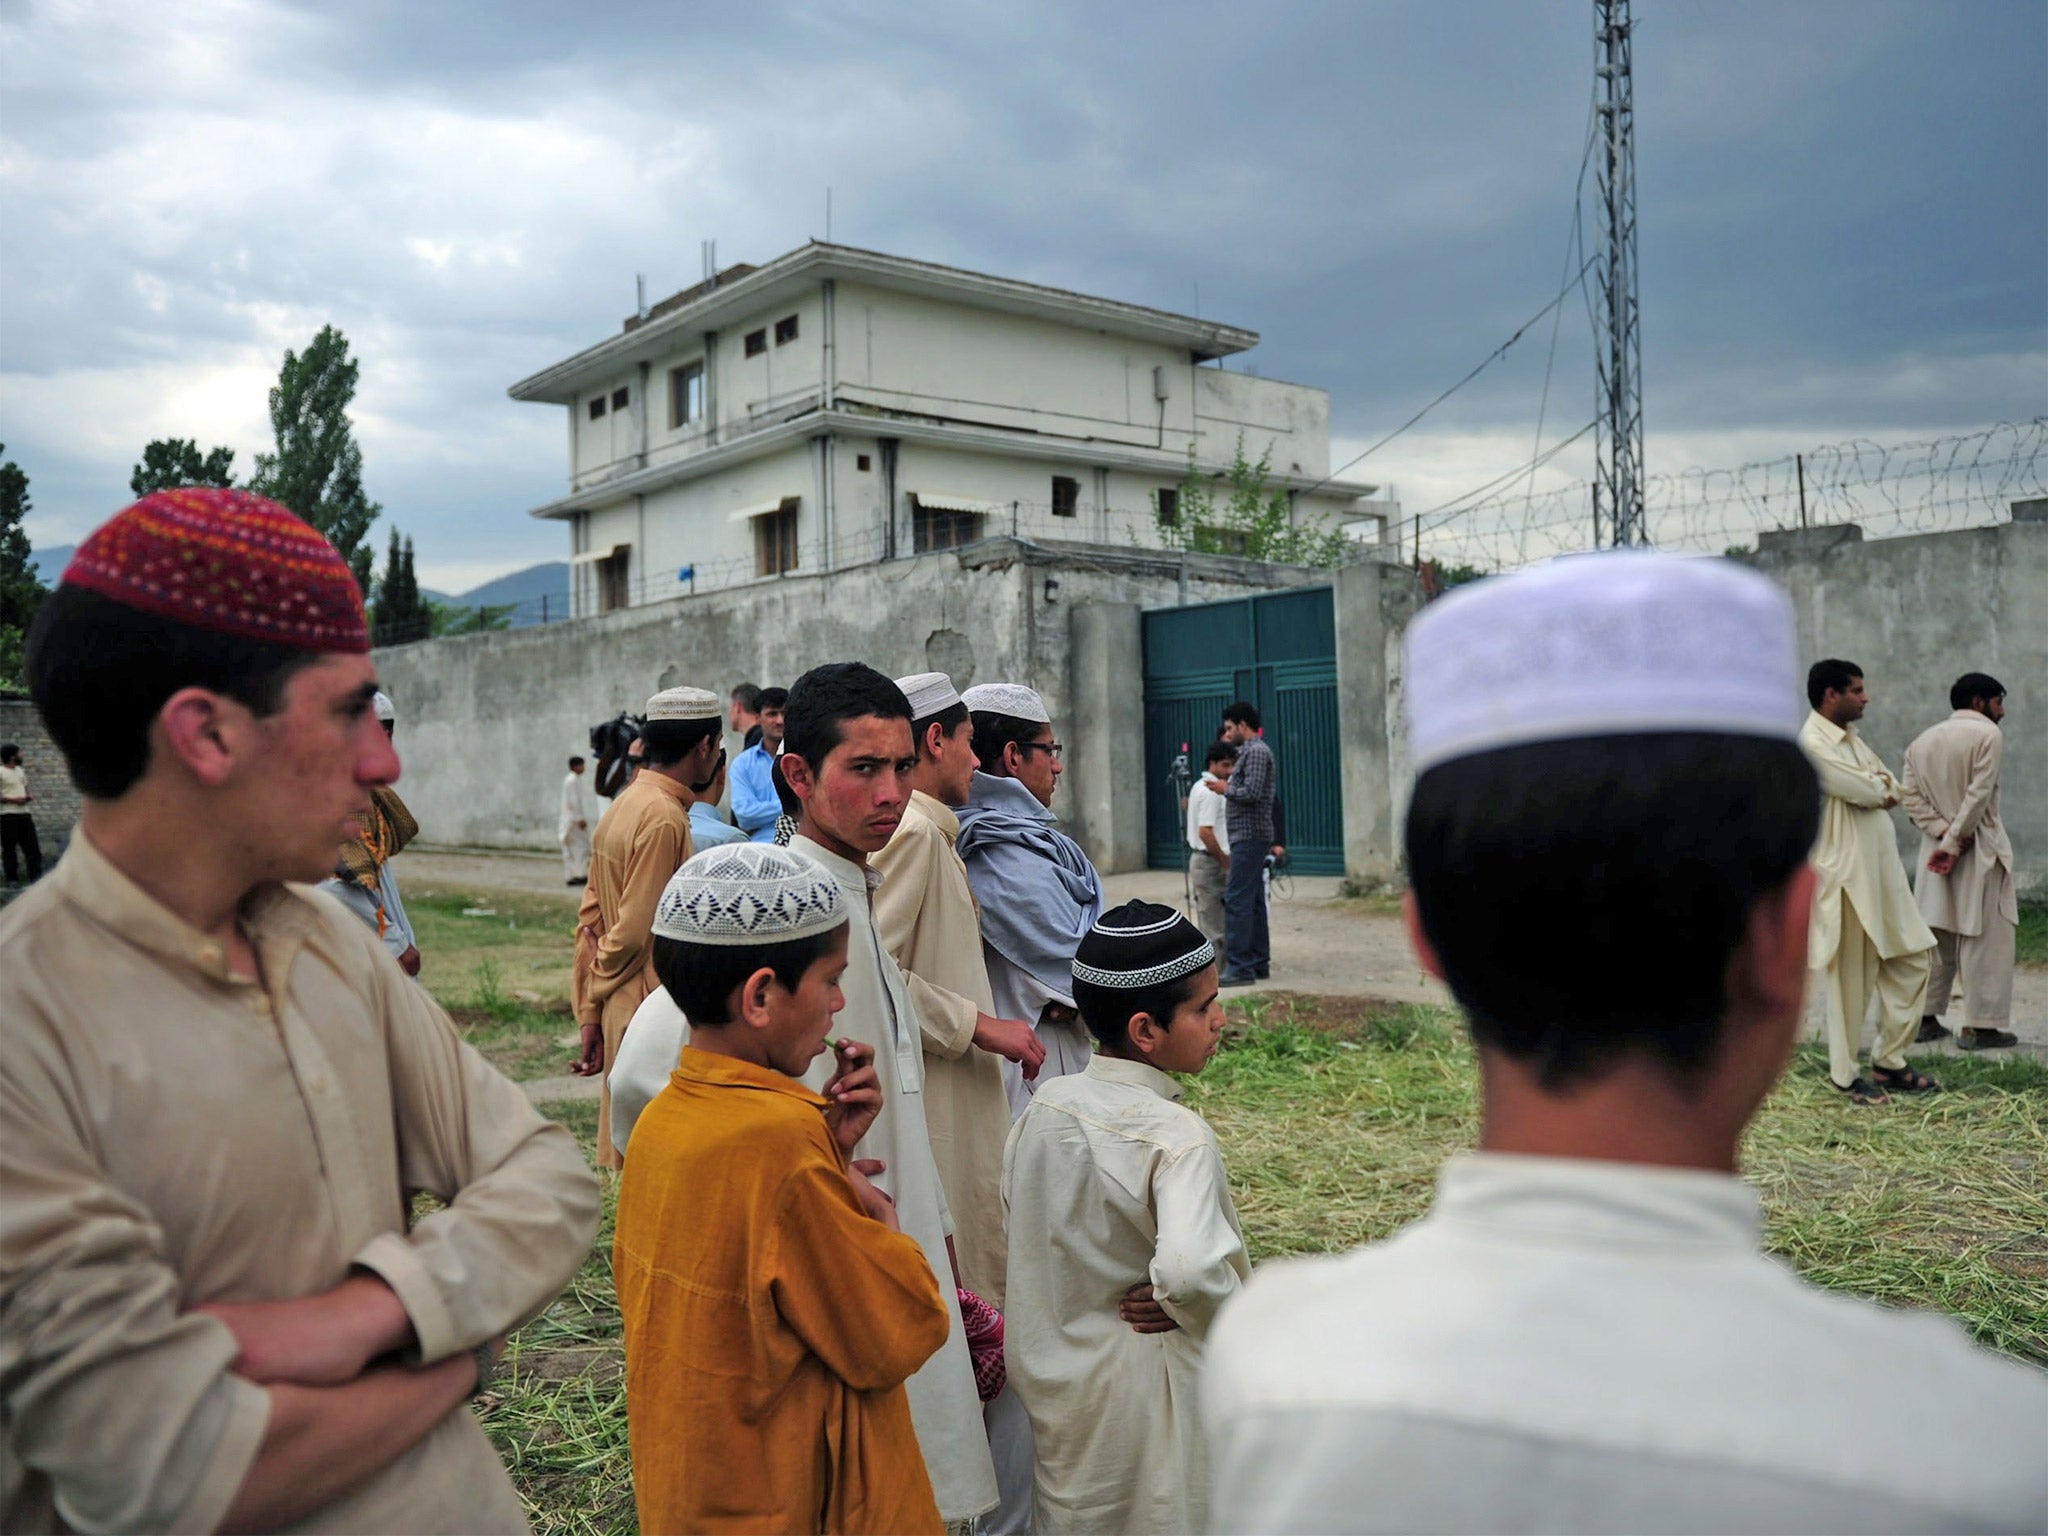 Pakistani seminary students gathering in front of the final hiding place of Osama bin Laden, in Abbottabad, in 2011